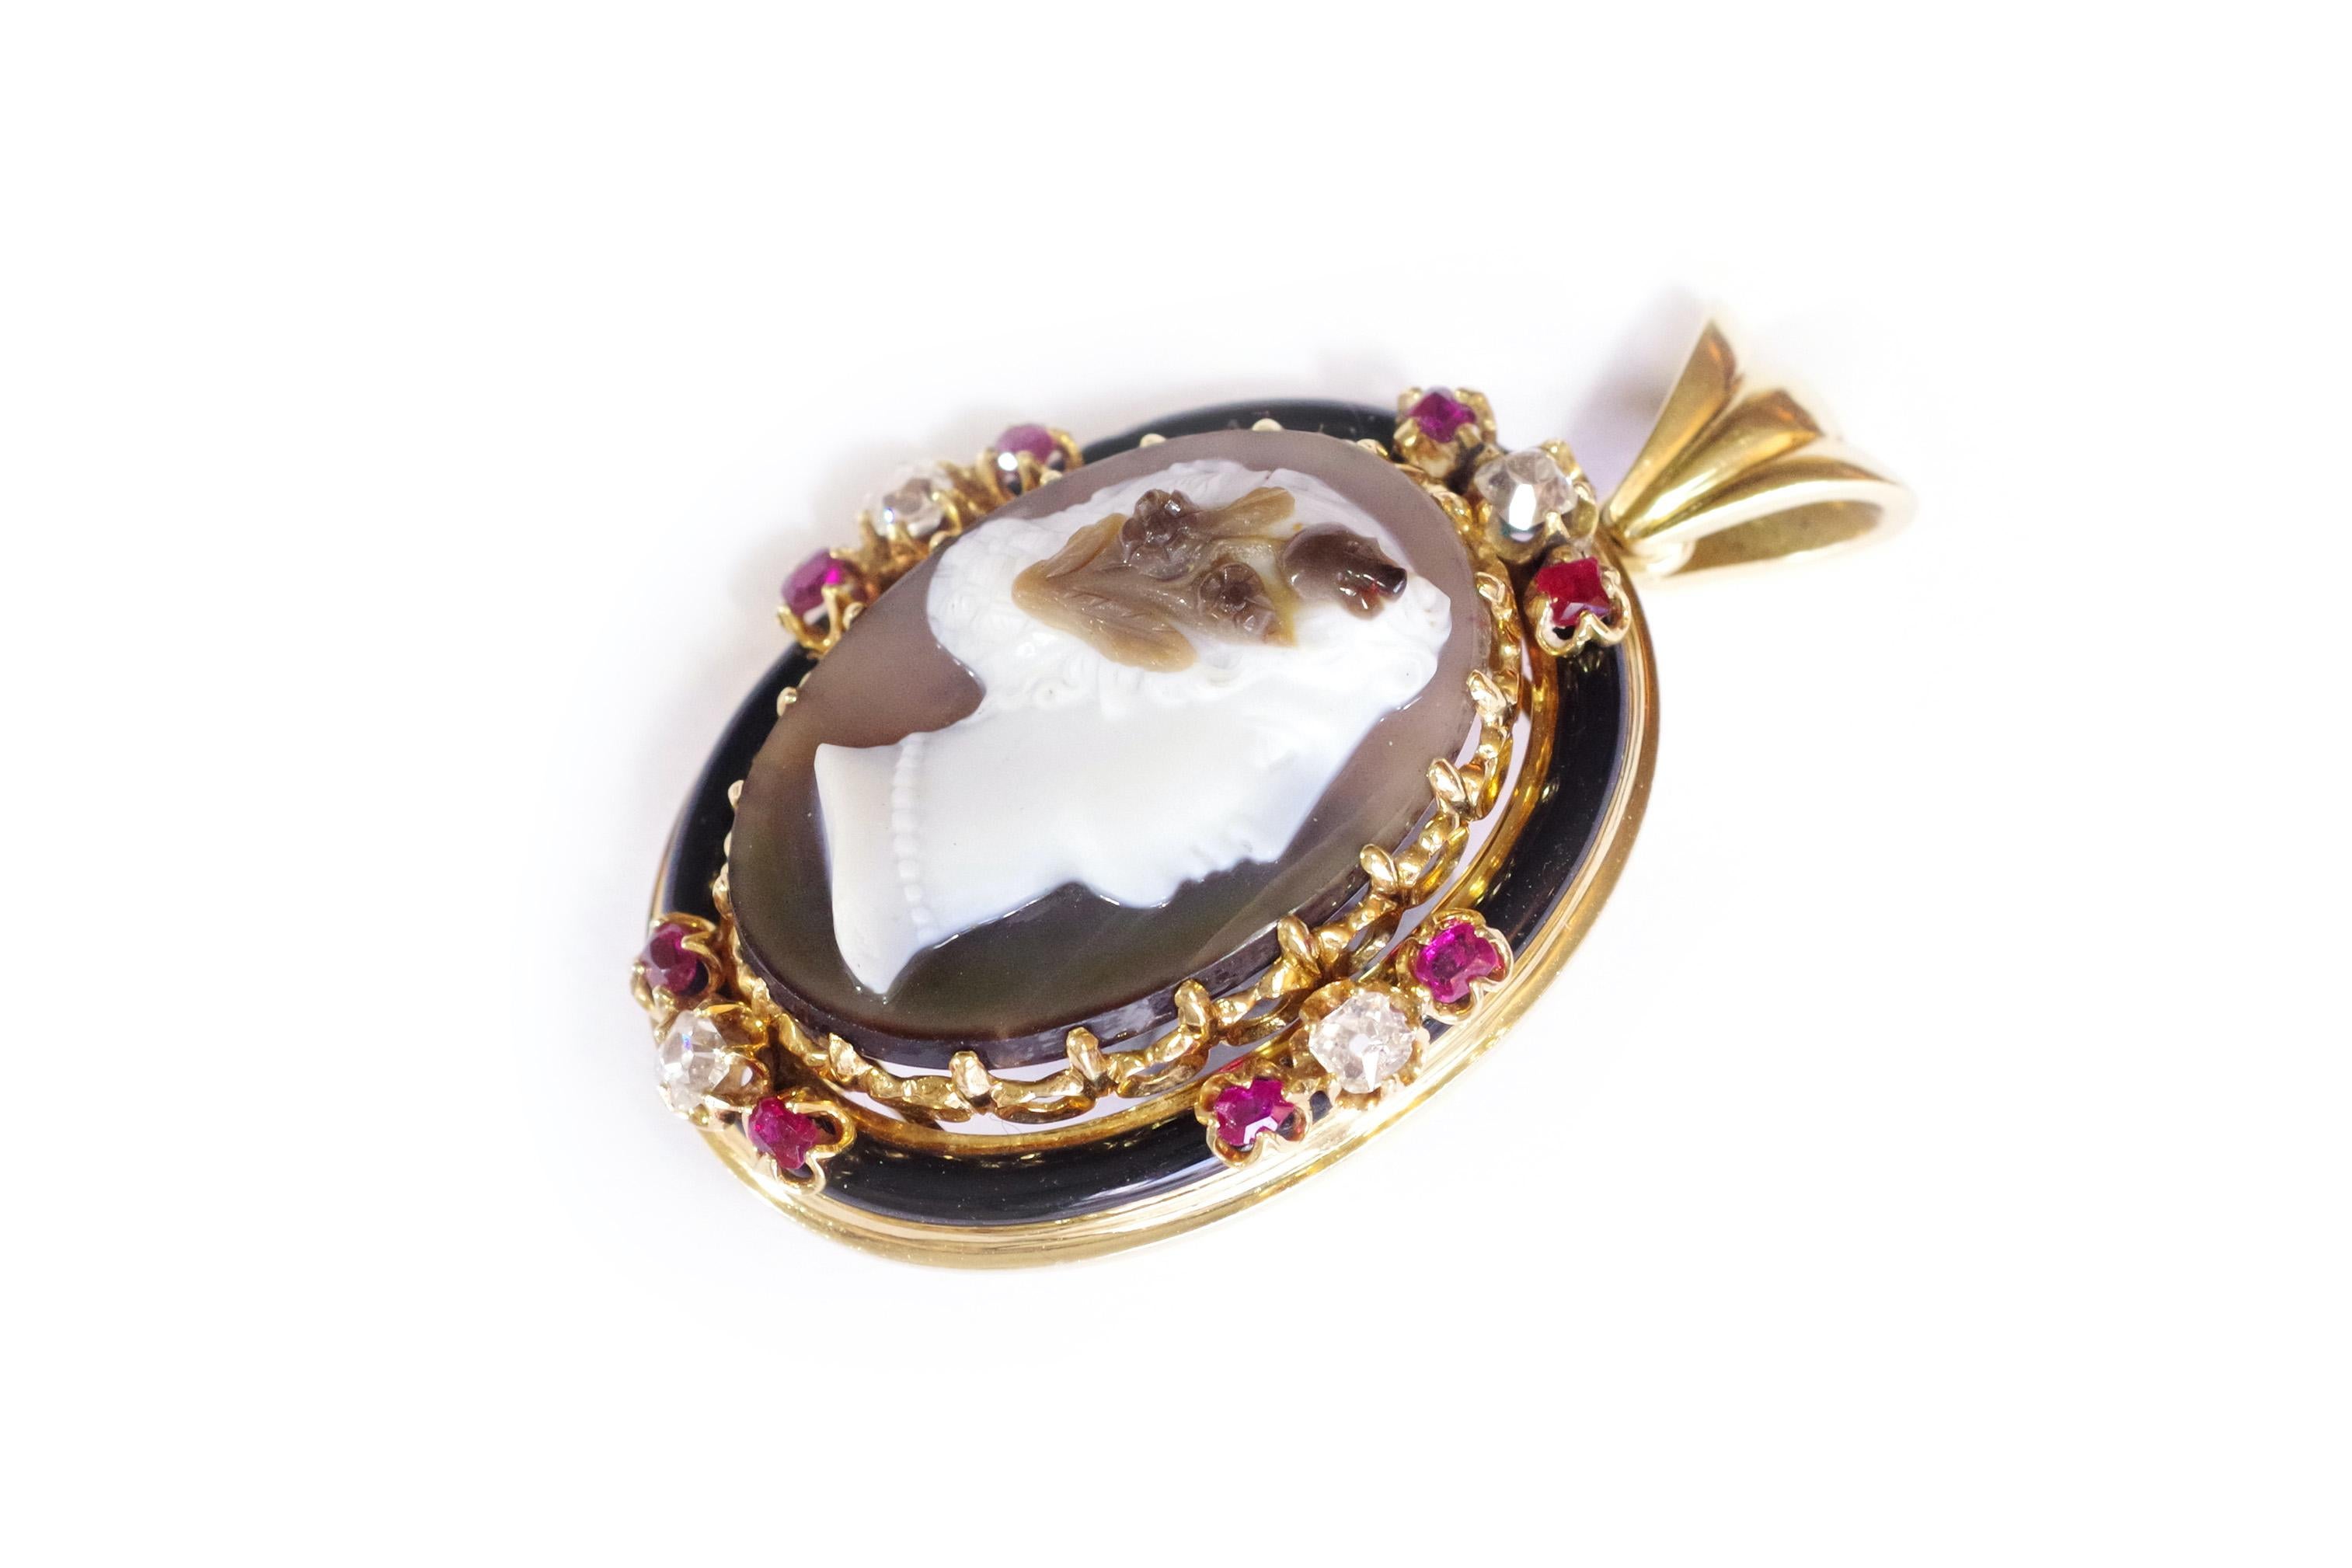 Victorian agate cameo pendant in yellow gold 18 karats decorated with the profile of the goddess Flora, wearing flowers in her hair. The agate has three layers: gray for the background, white for the profile, brown for the flowers in the hair. The